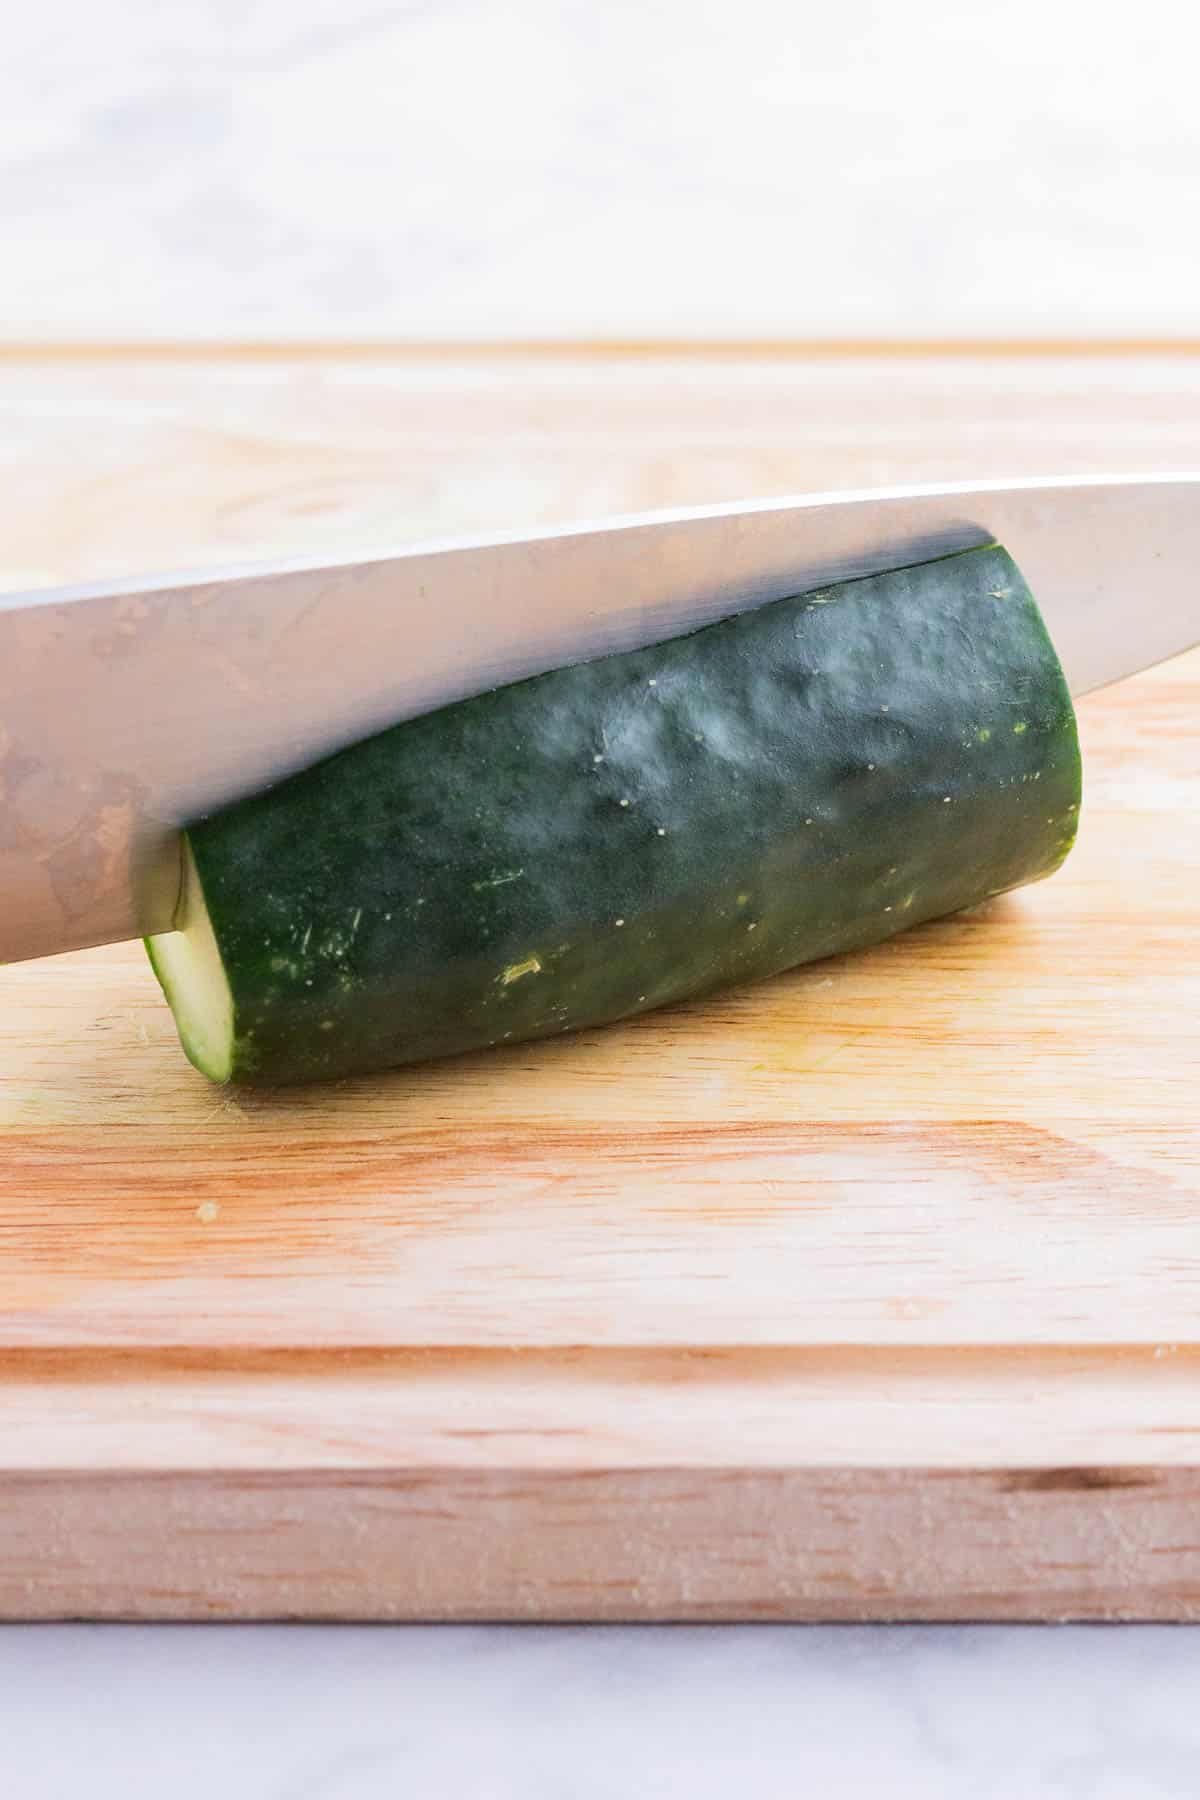 A cucumber is cut in half lengthwise.